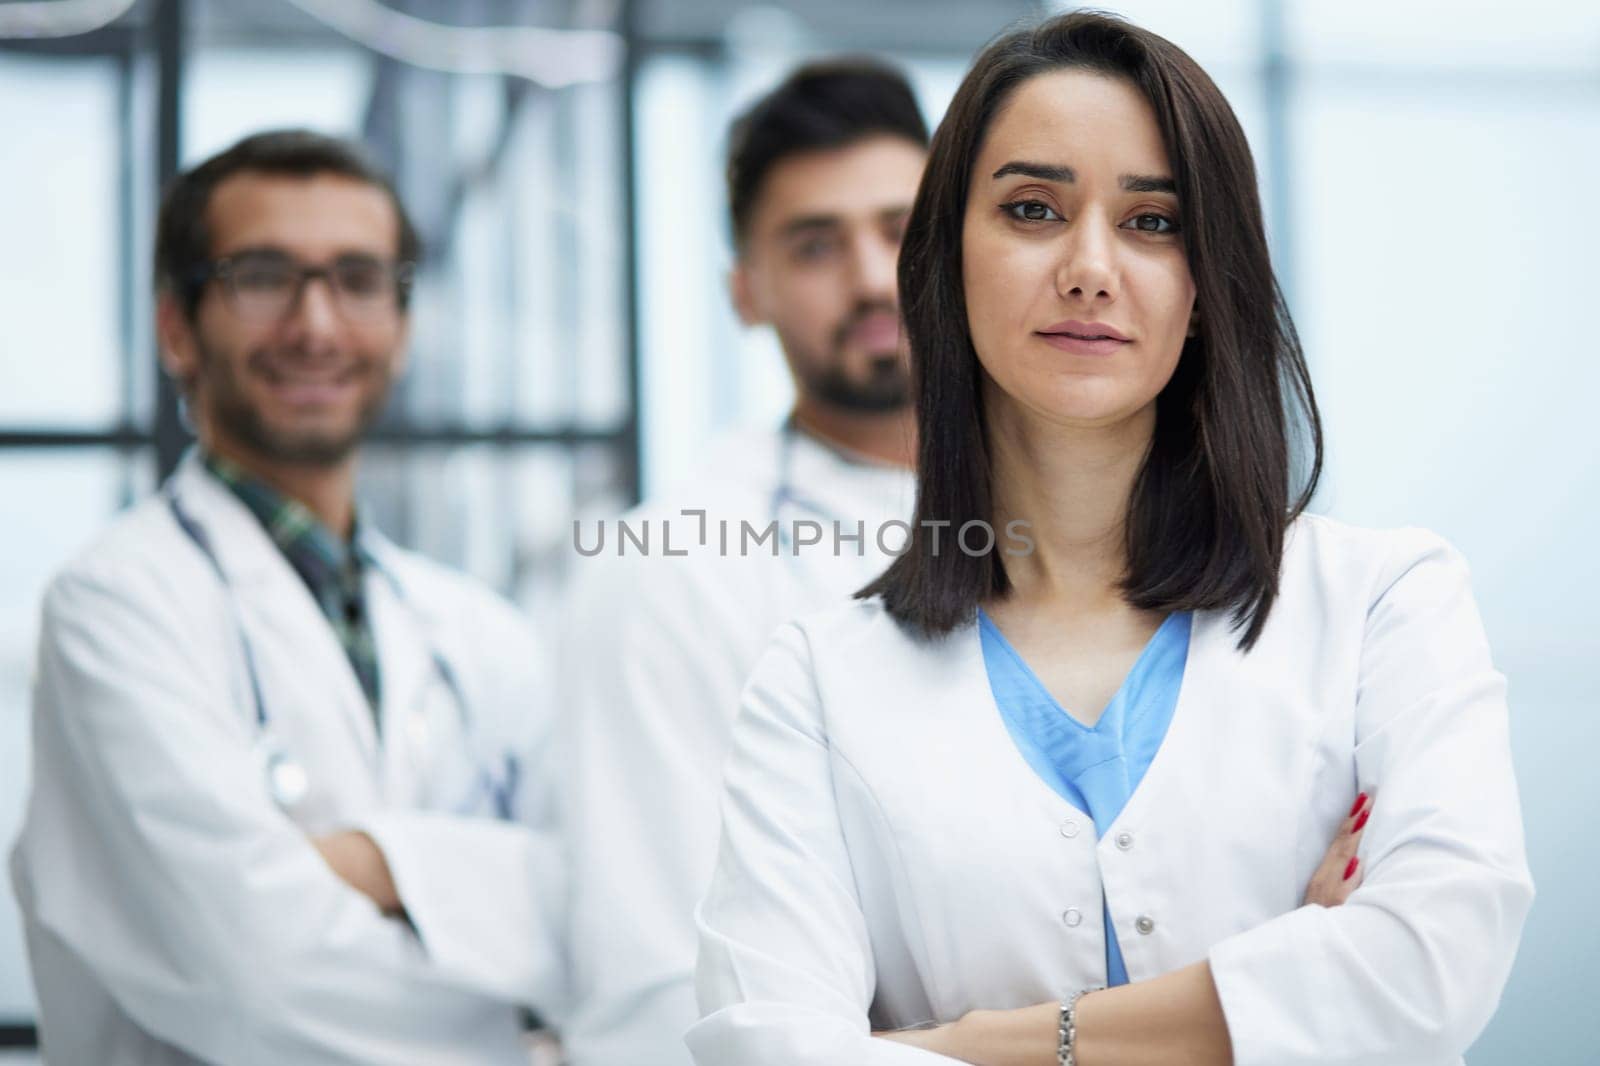 Attractive female doctor in front of the medical staff in the hospital stands with her arms crossed